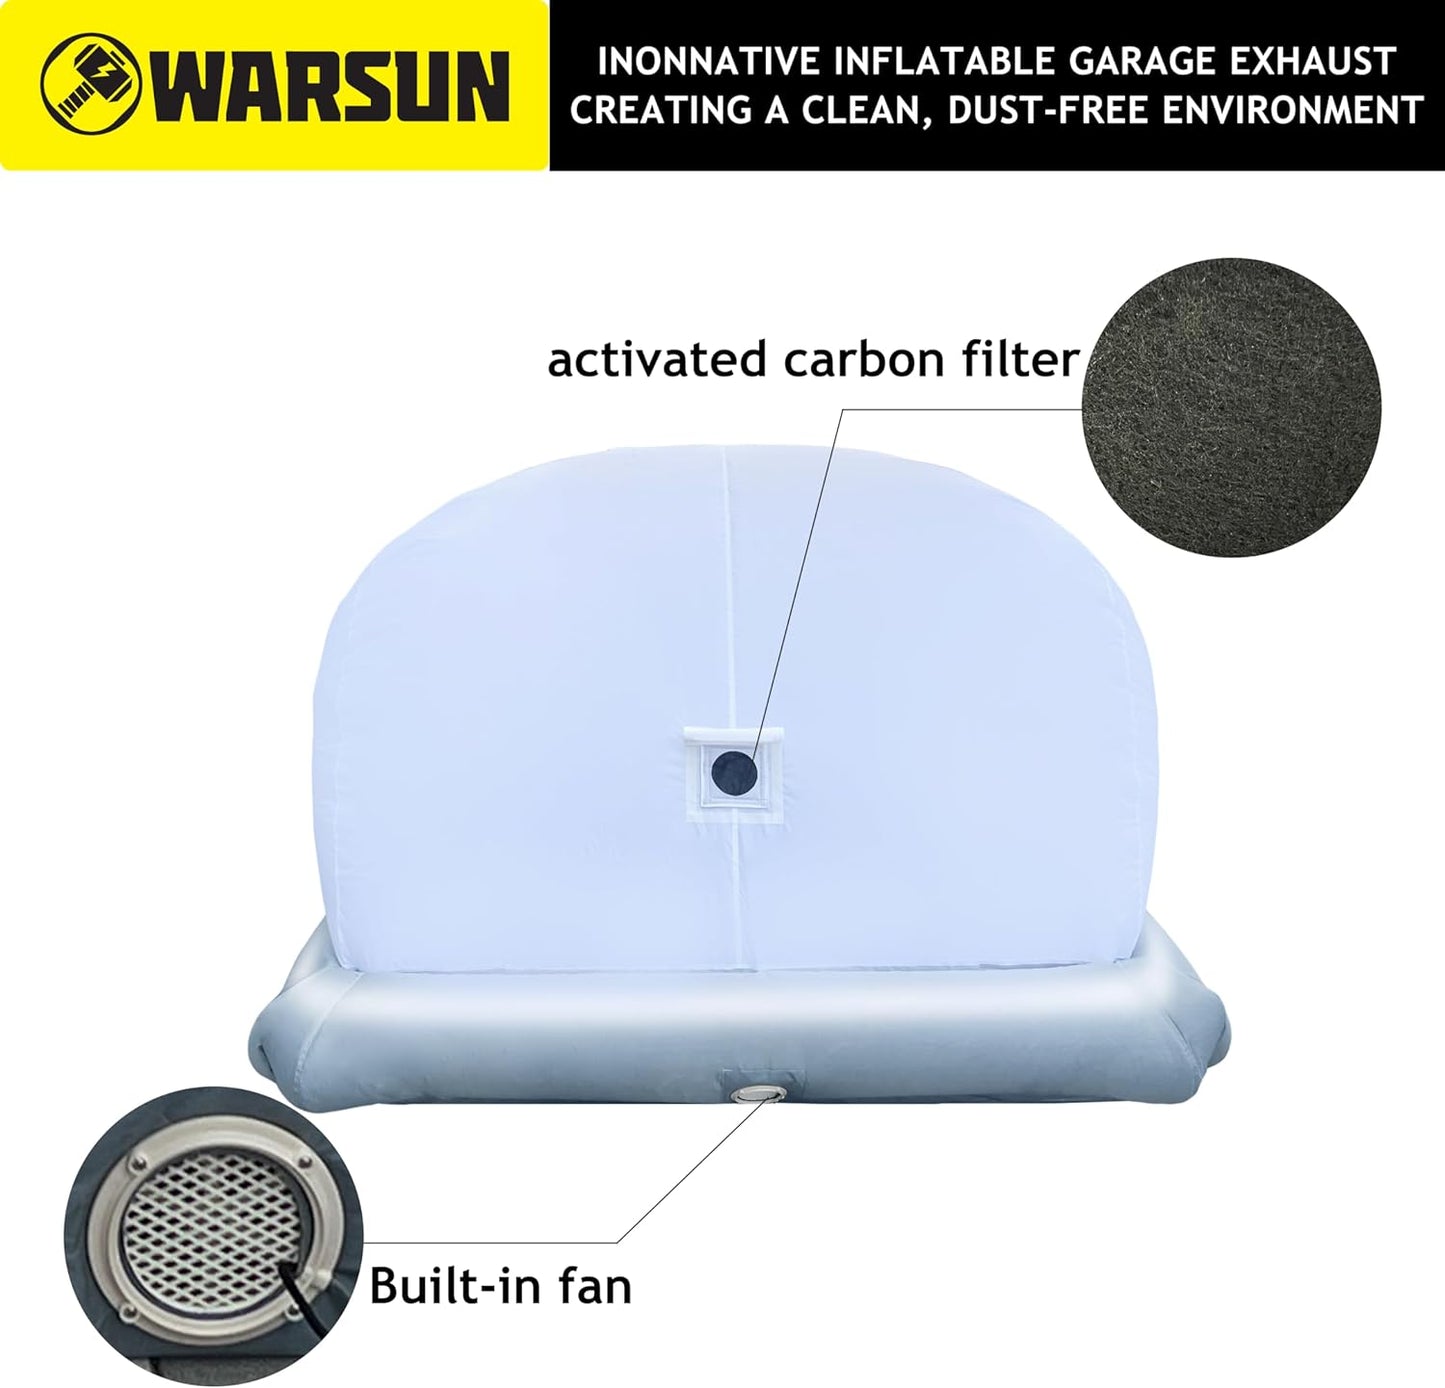 WARSUN 19X8.5X5.5Ft Portable Car Cover Inflatable Car Shield Car Showcase Portable Inflatable Garage for Car Cover and Storage